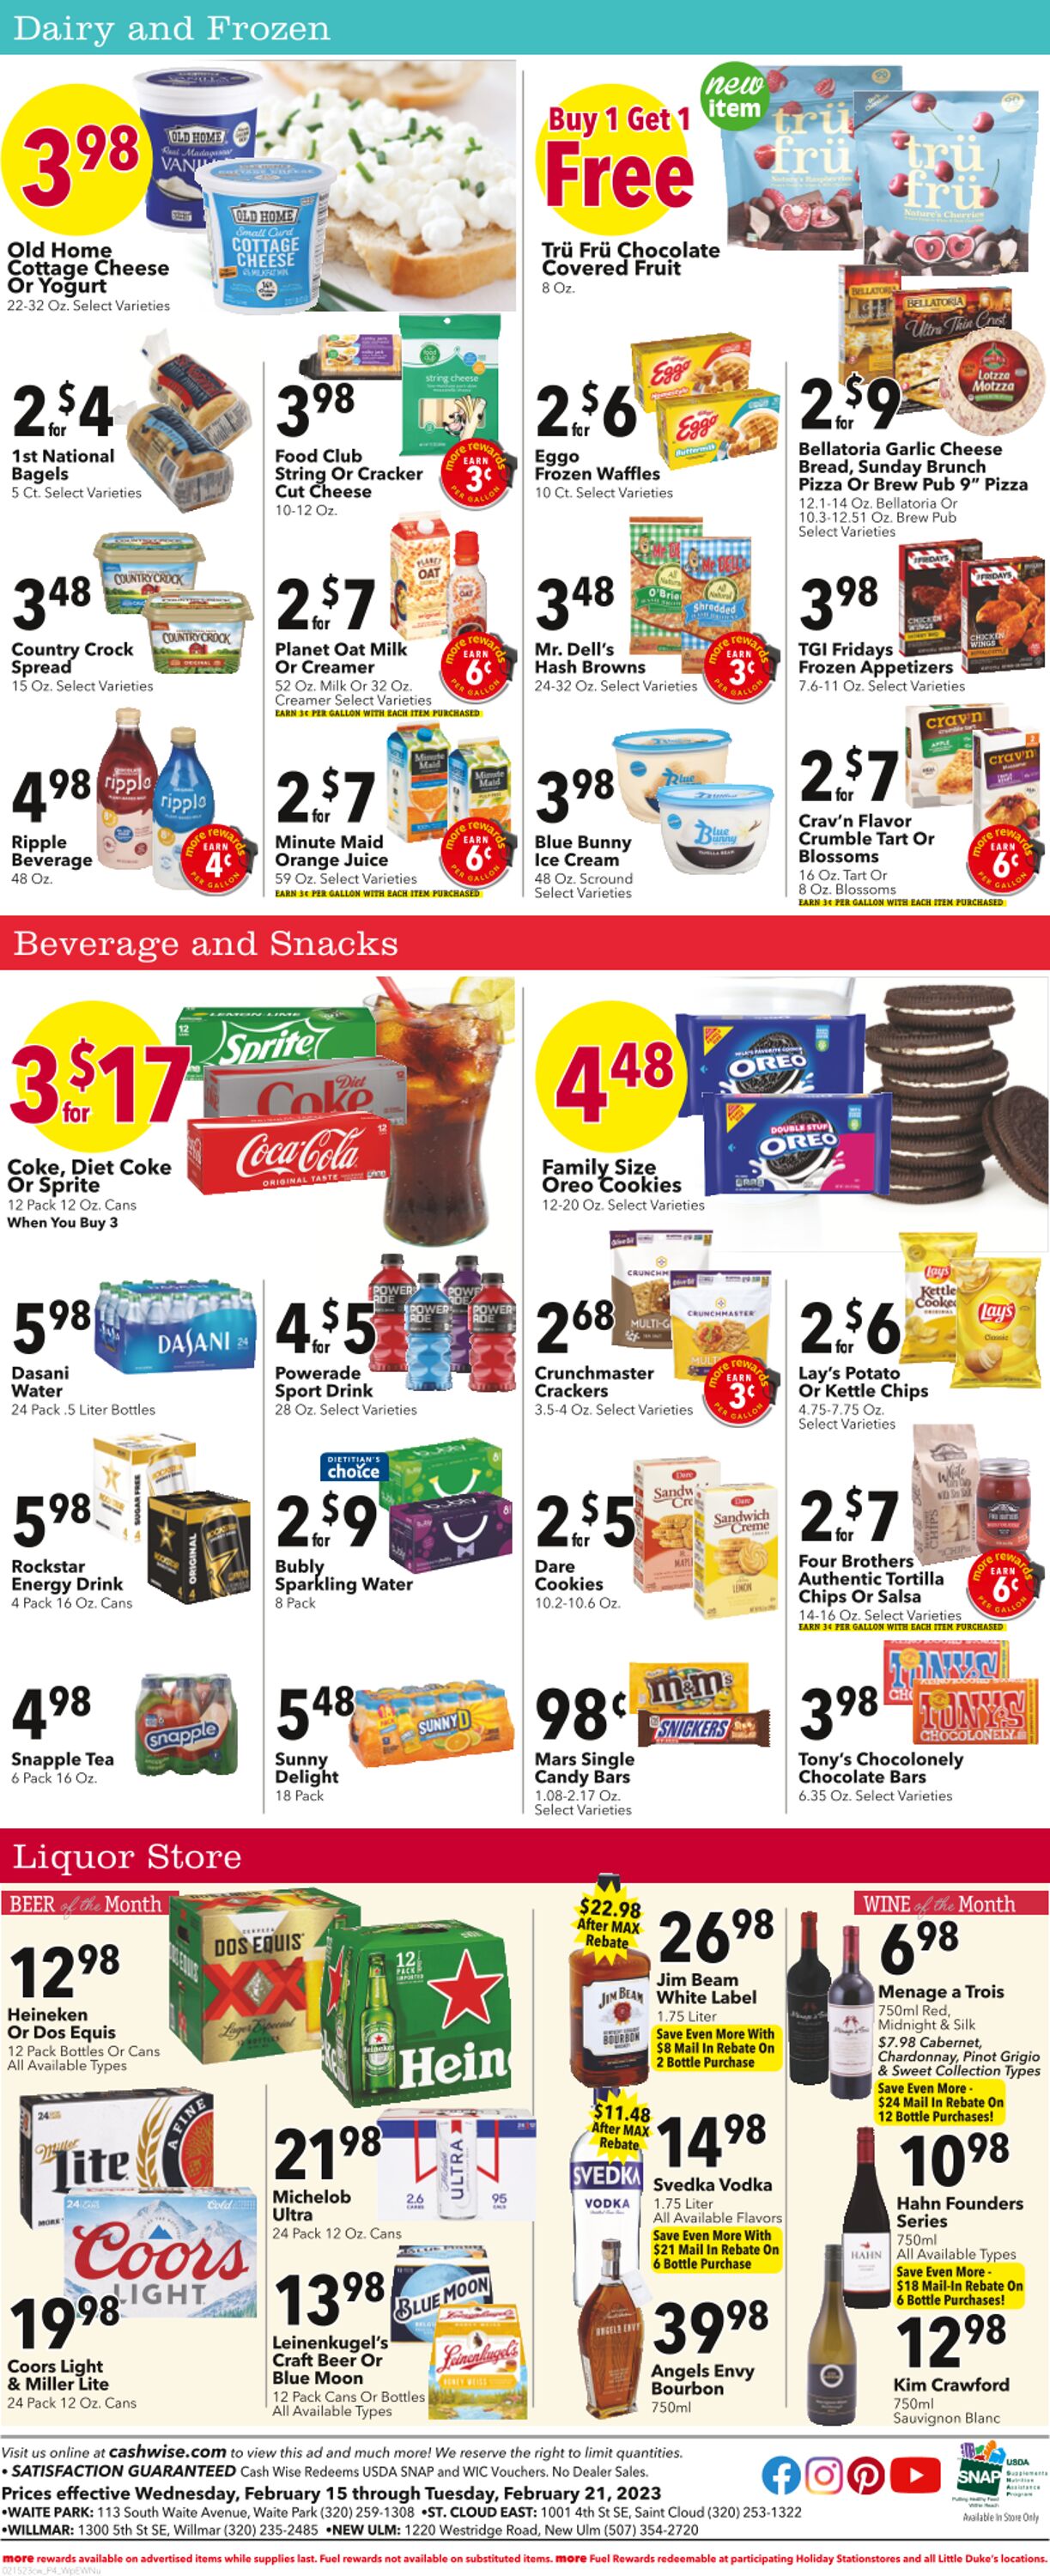 Cash Wise Weekly Ad Circular - valid 02/16-02/22/2023 (Page 4)